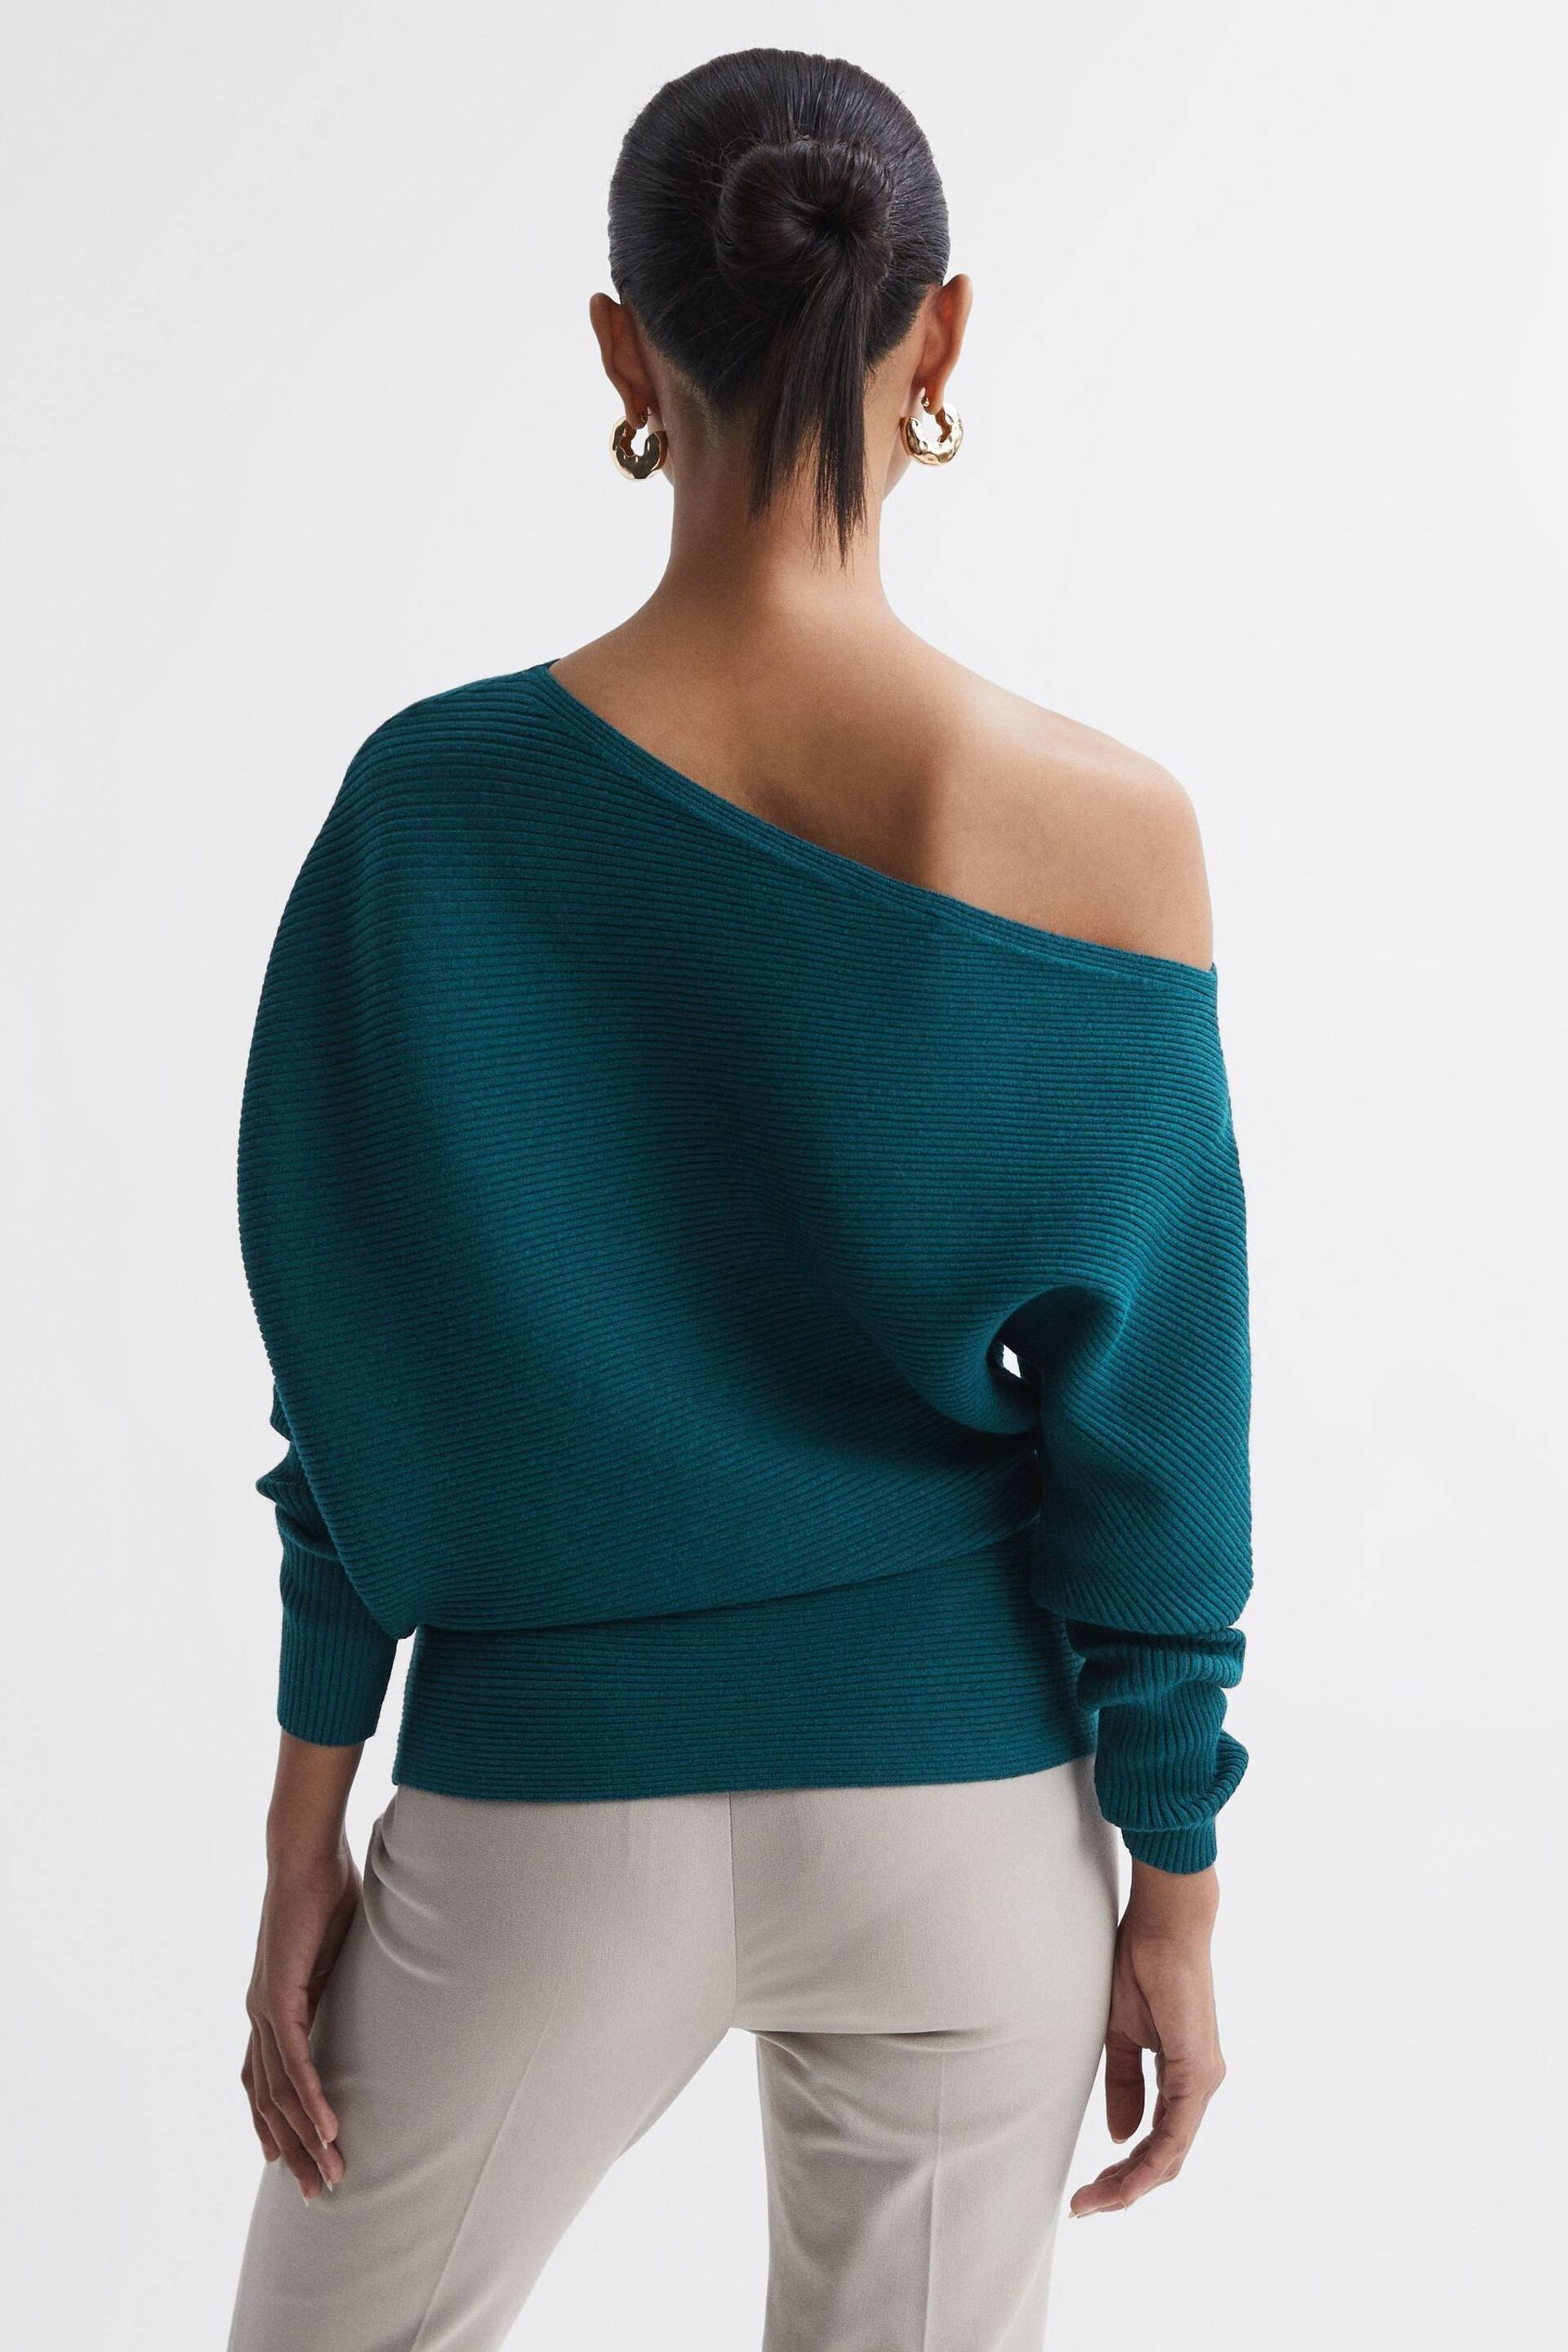 Reiss Teal Lorna Asymmetric Drape Knitted Top - Image 5 of 5